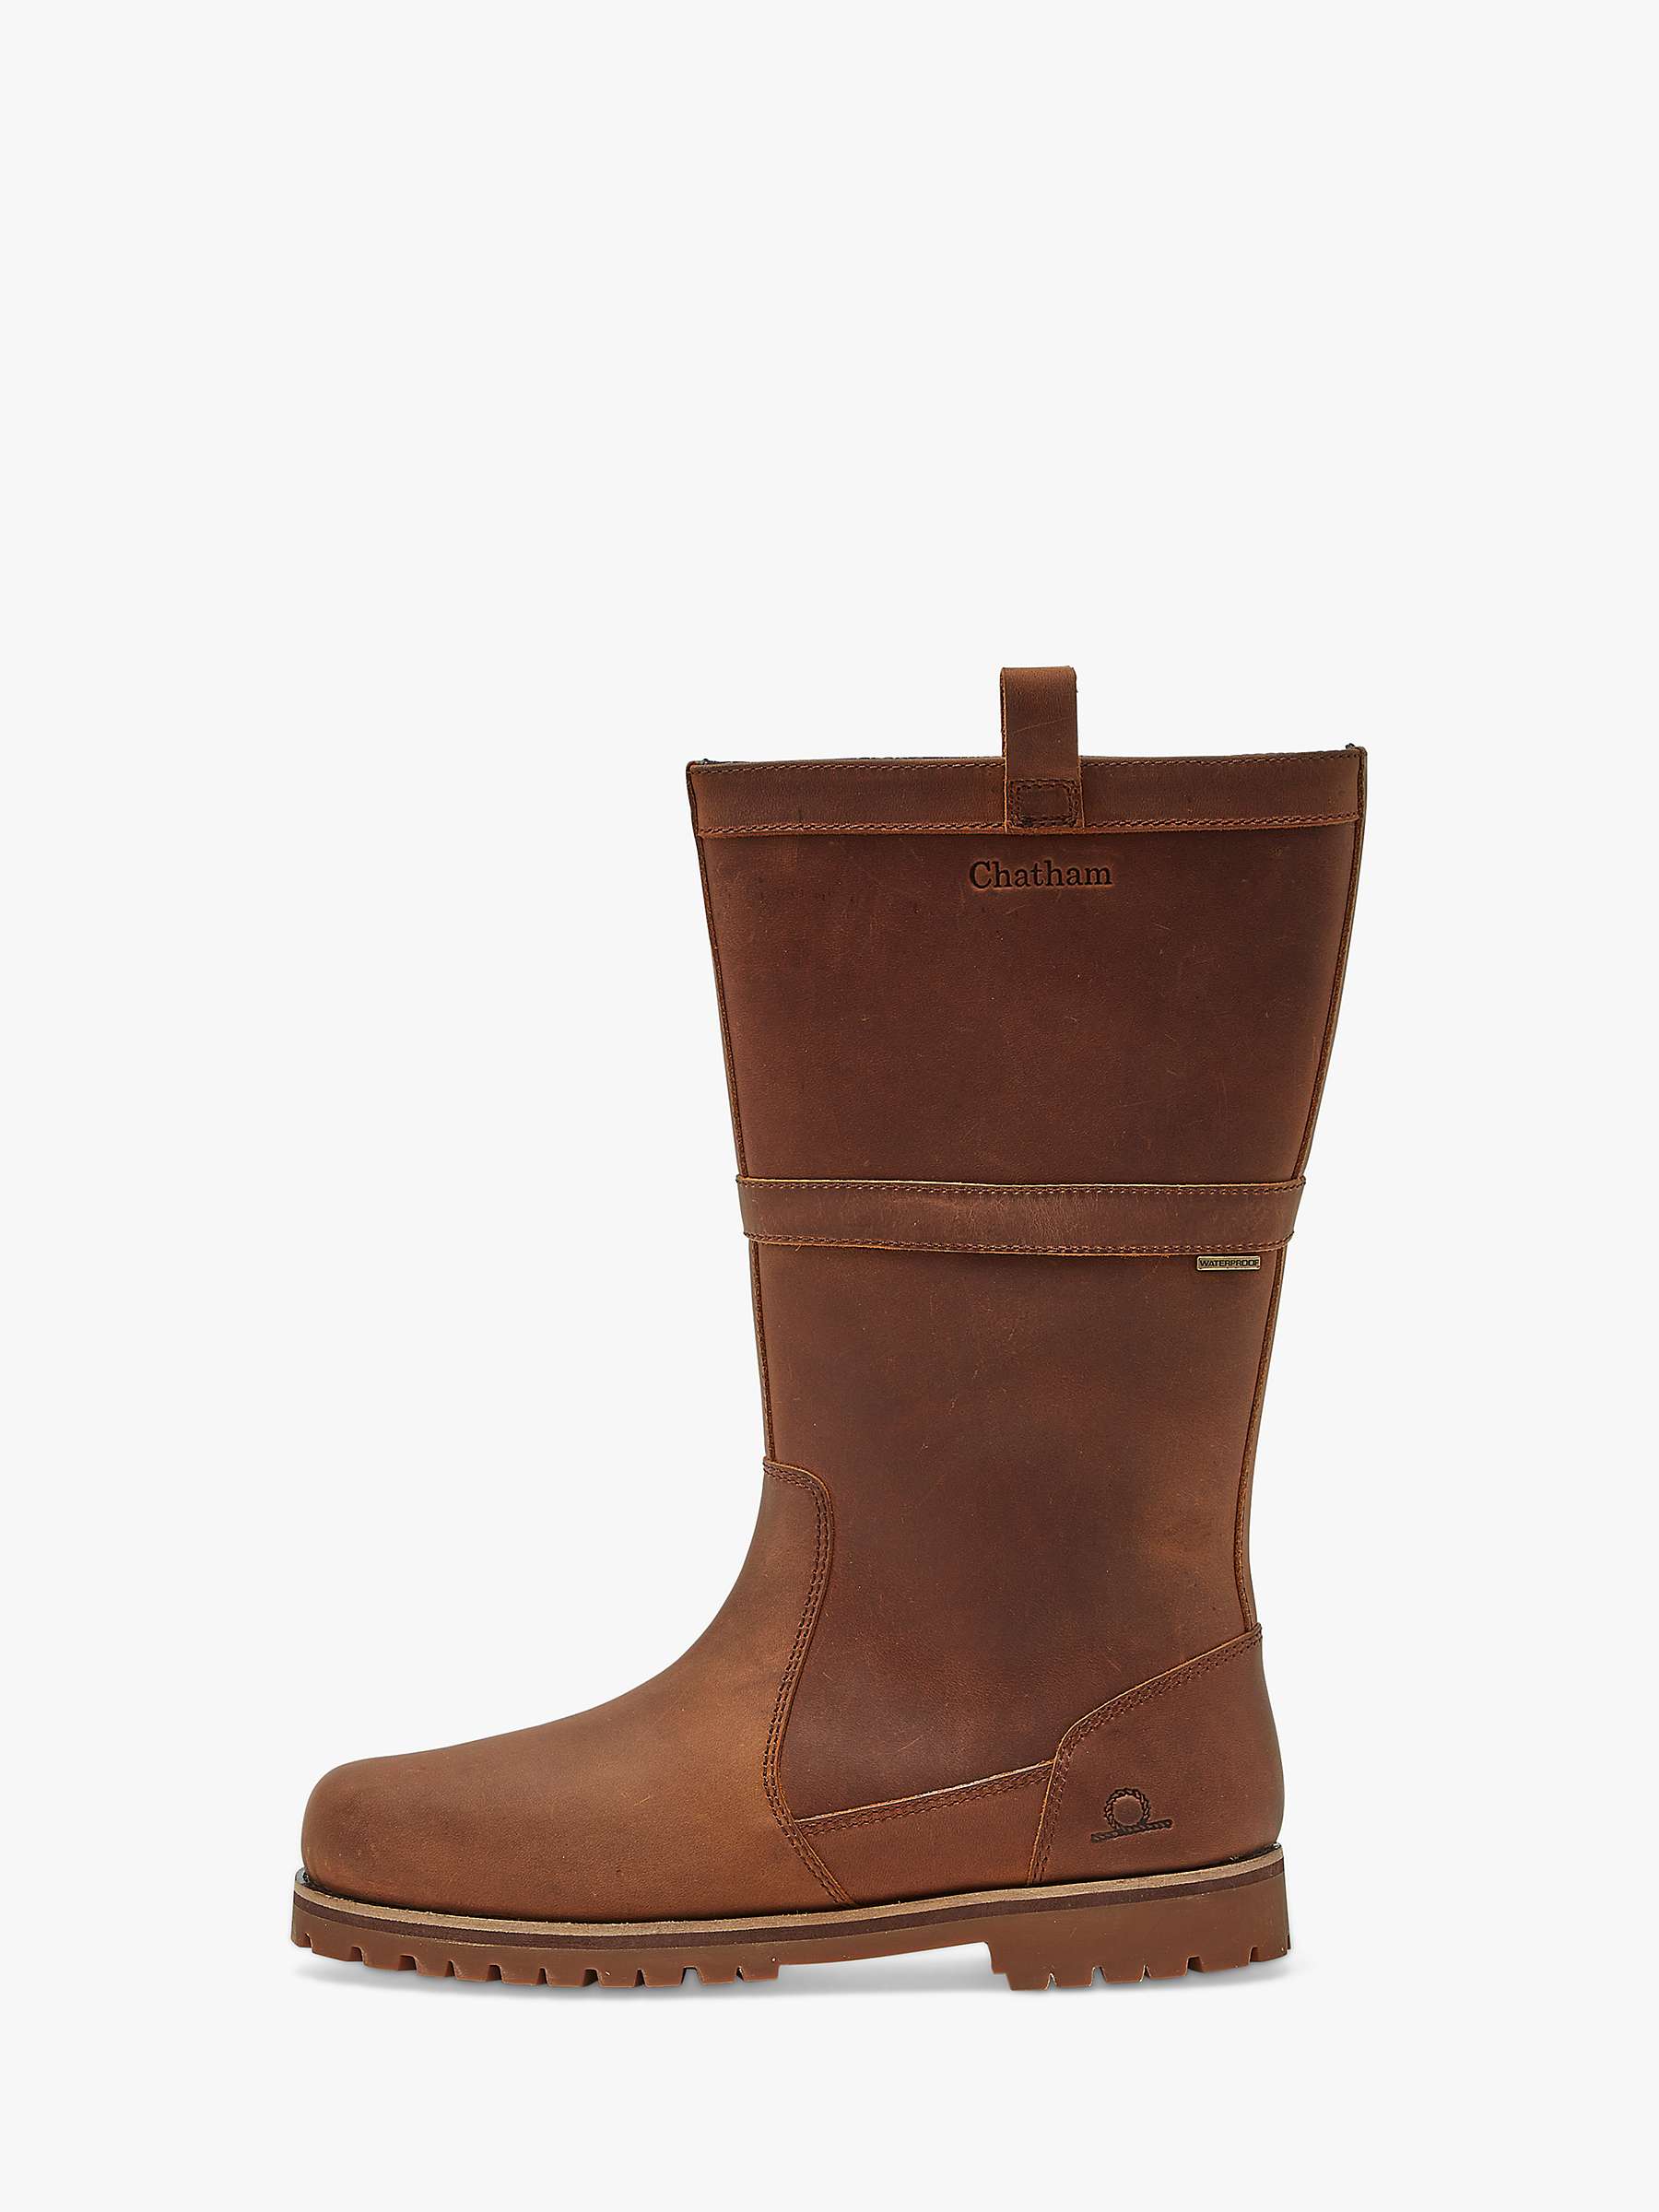 Buy Chatham Loyton Waterproof Leather Boots, Walnut Online at johnlewis.com